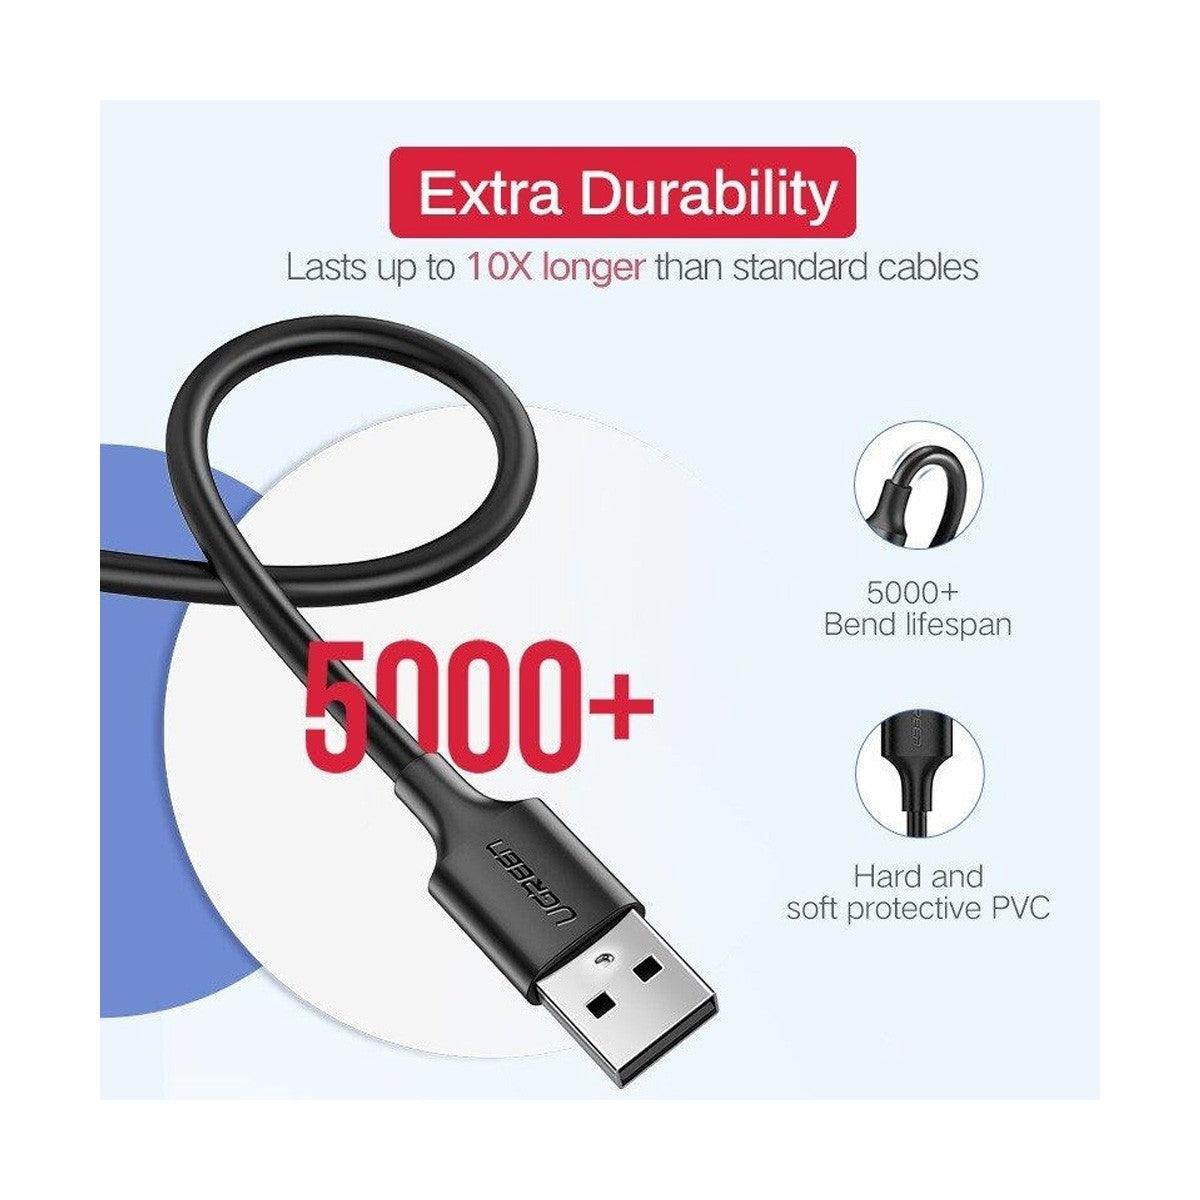 UGREEN USB 2.0 A to Micro USB Cable Nickel Plating 2m (Black) 60138